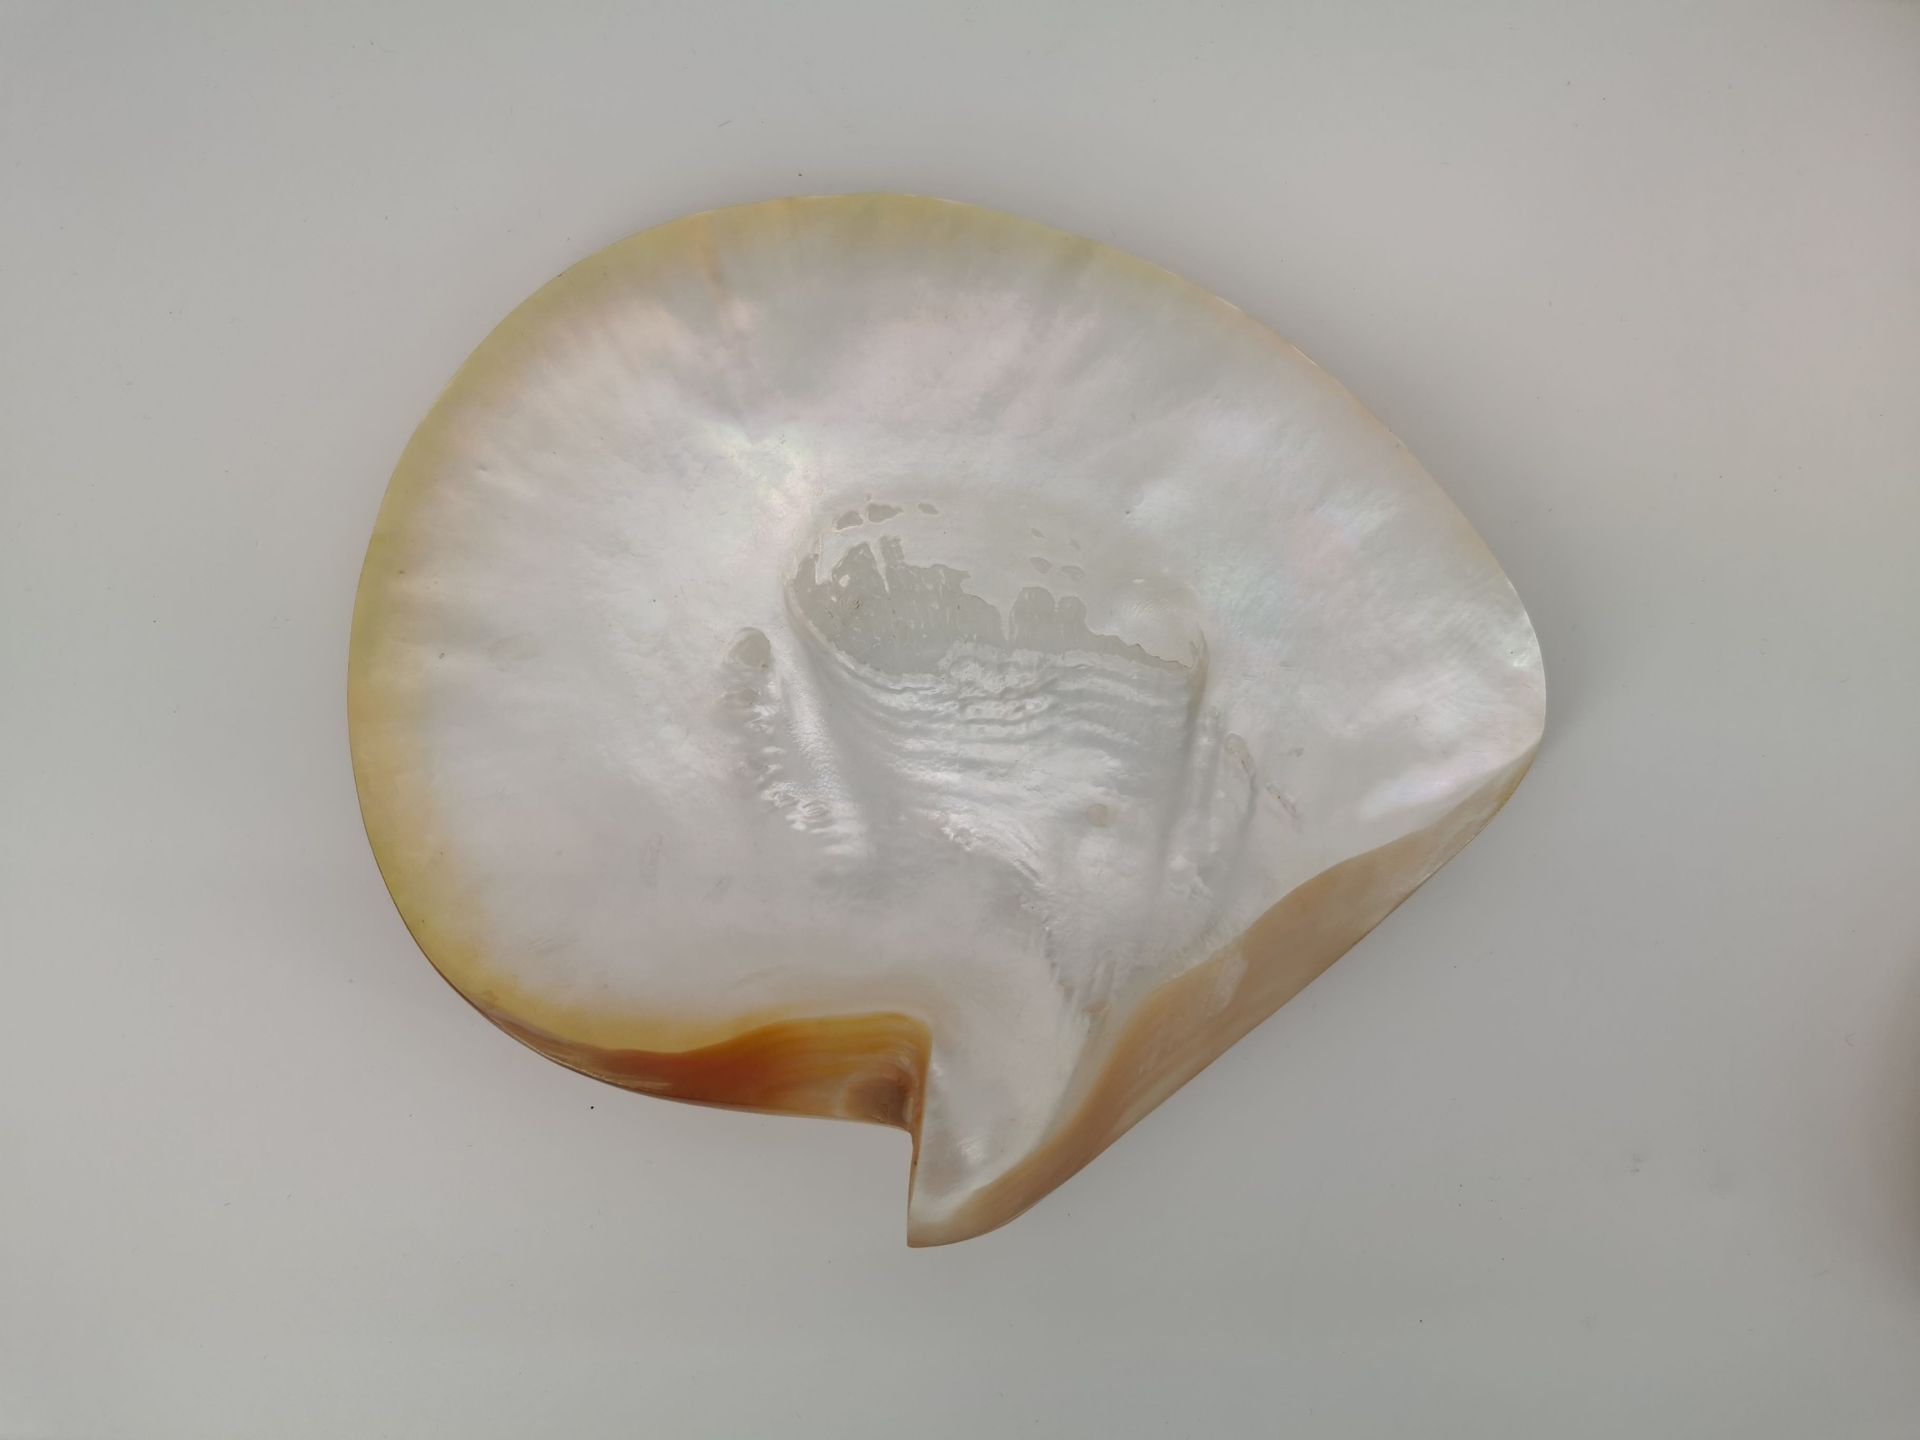 4 CLAM SHELLS - Image 2 of 3